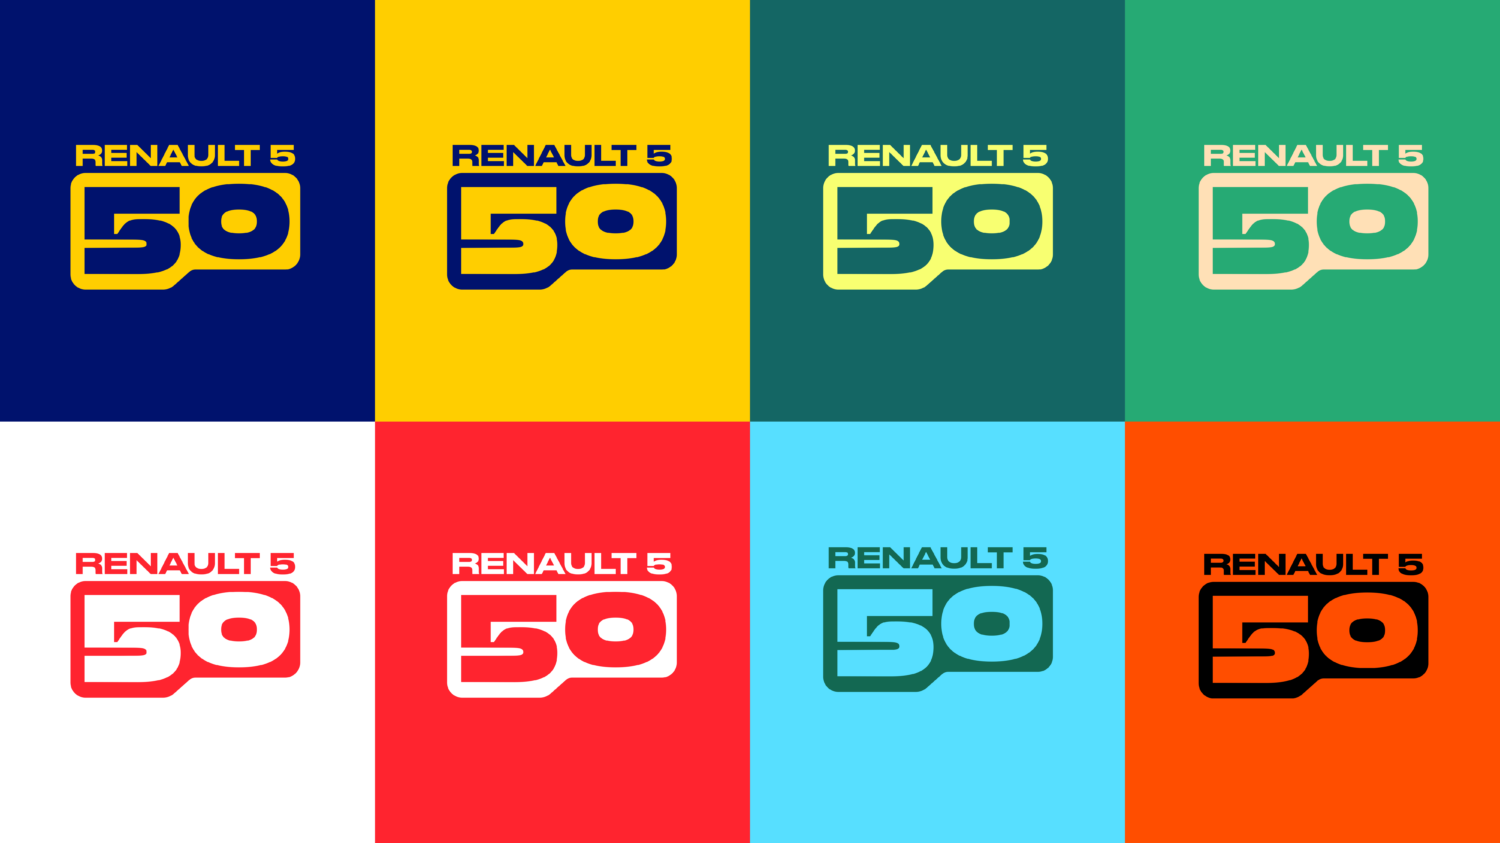 2022 - 50 years of the Renault 5: a year of pop and surprises